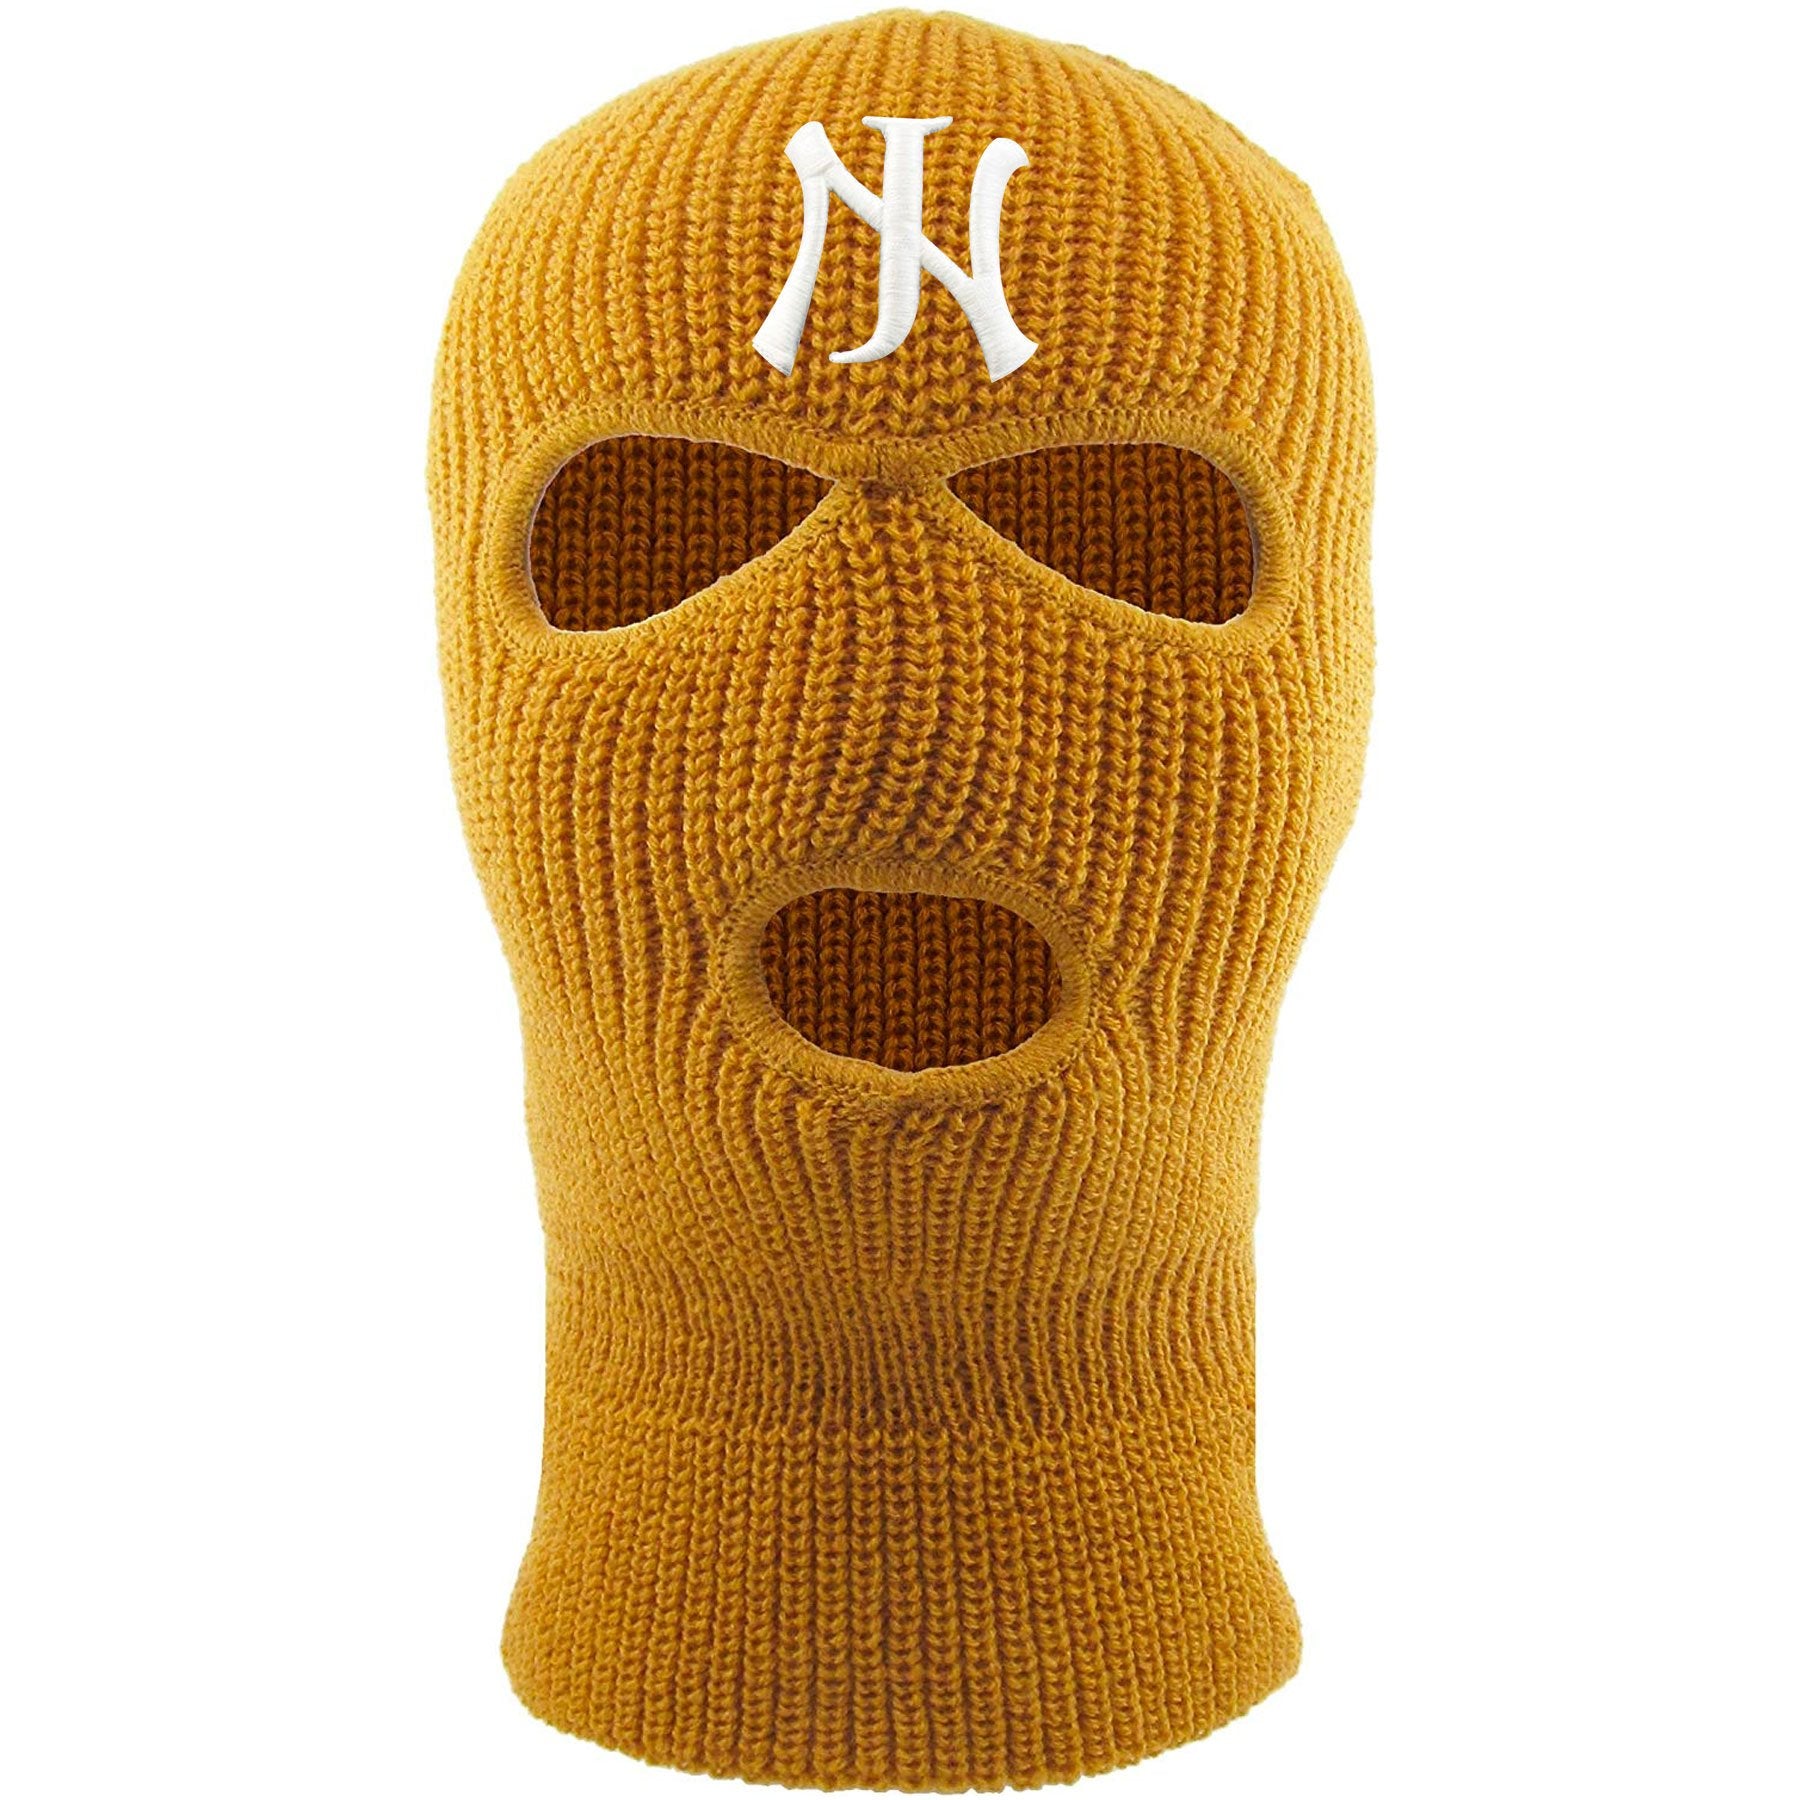 Embroidered on the forehead of the timberland new jersey ski mask is the NJ logo